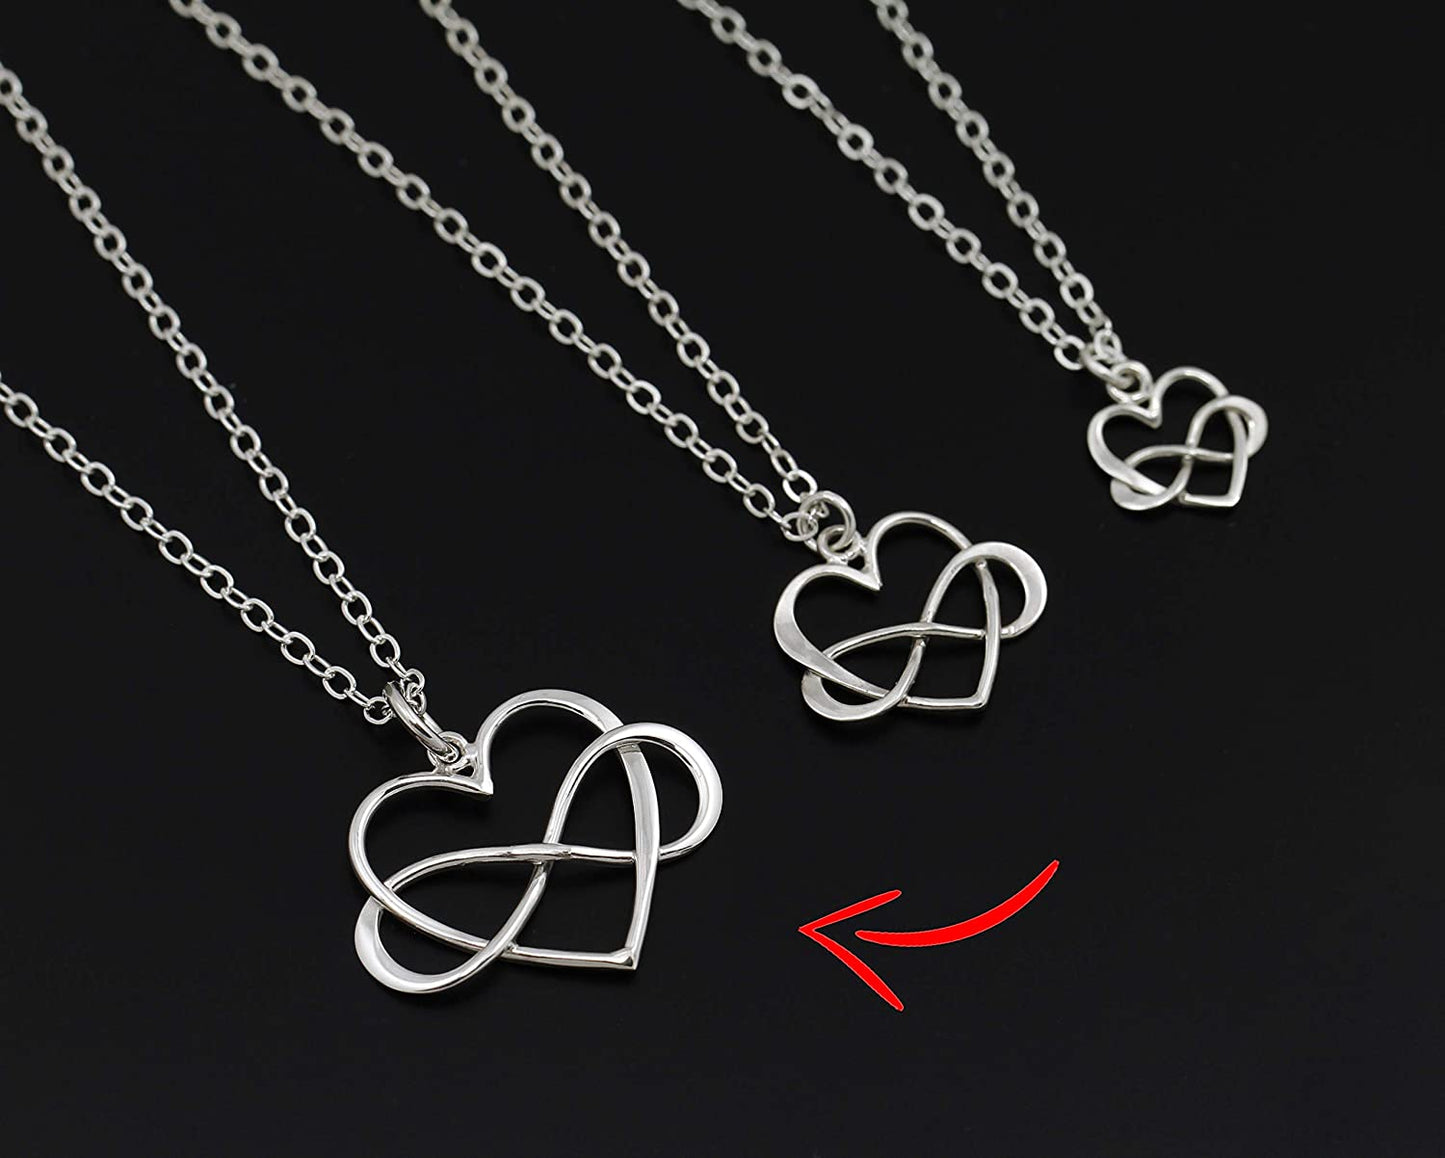 Friendship Gift • Friends for Infinity • Sterling Silver • Best Friend Jewelry • Long Distance BFF • Miss You • Heart Charm Necklace for Women